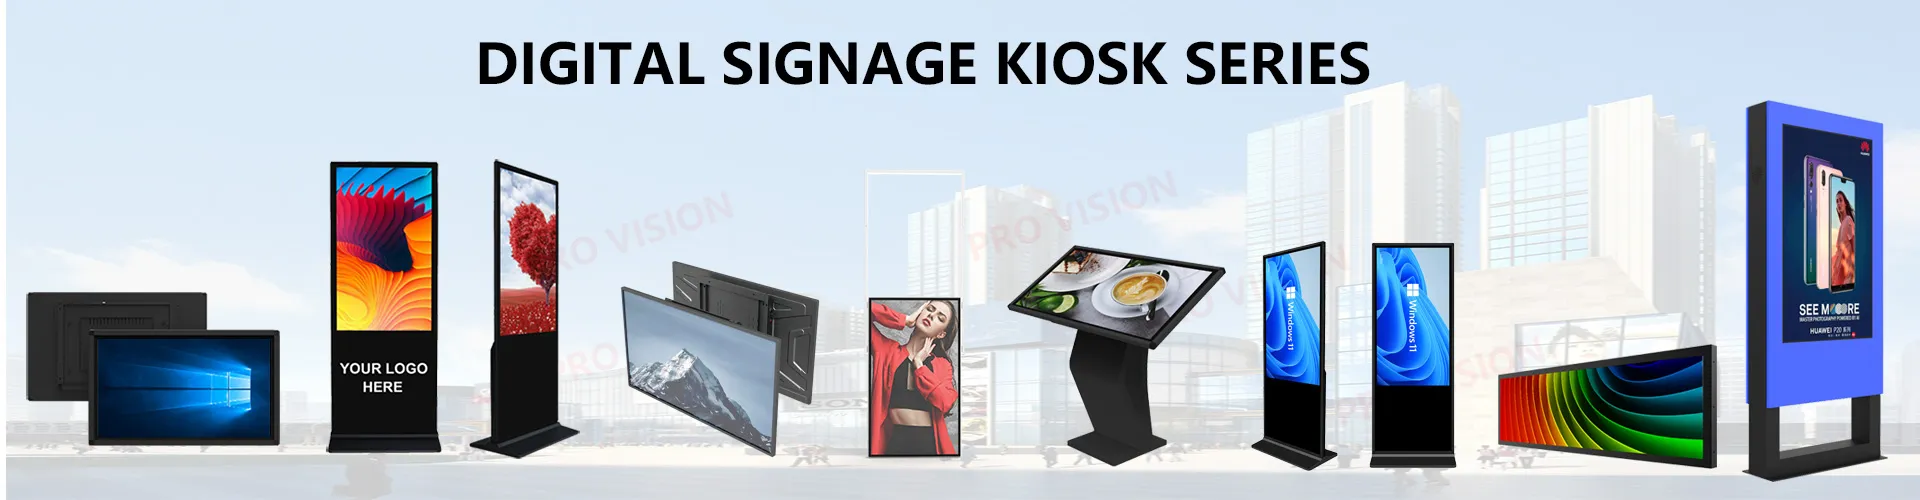 55 inch free standing touch screen kiosk